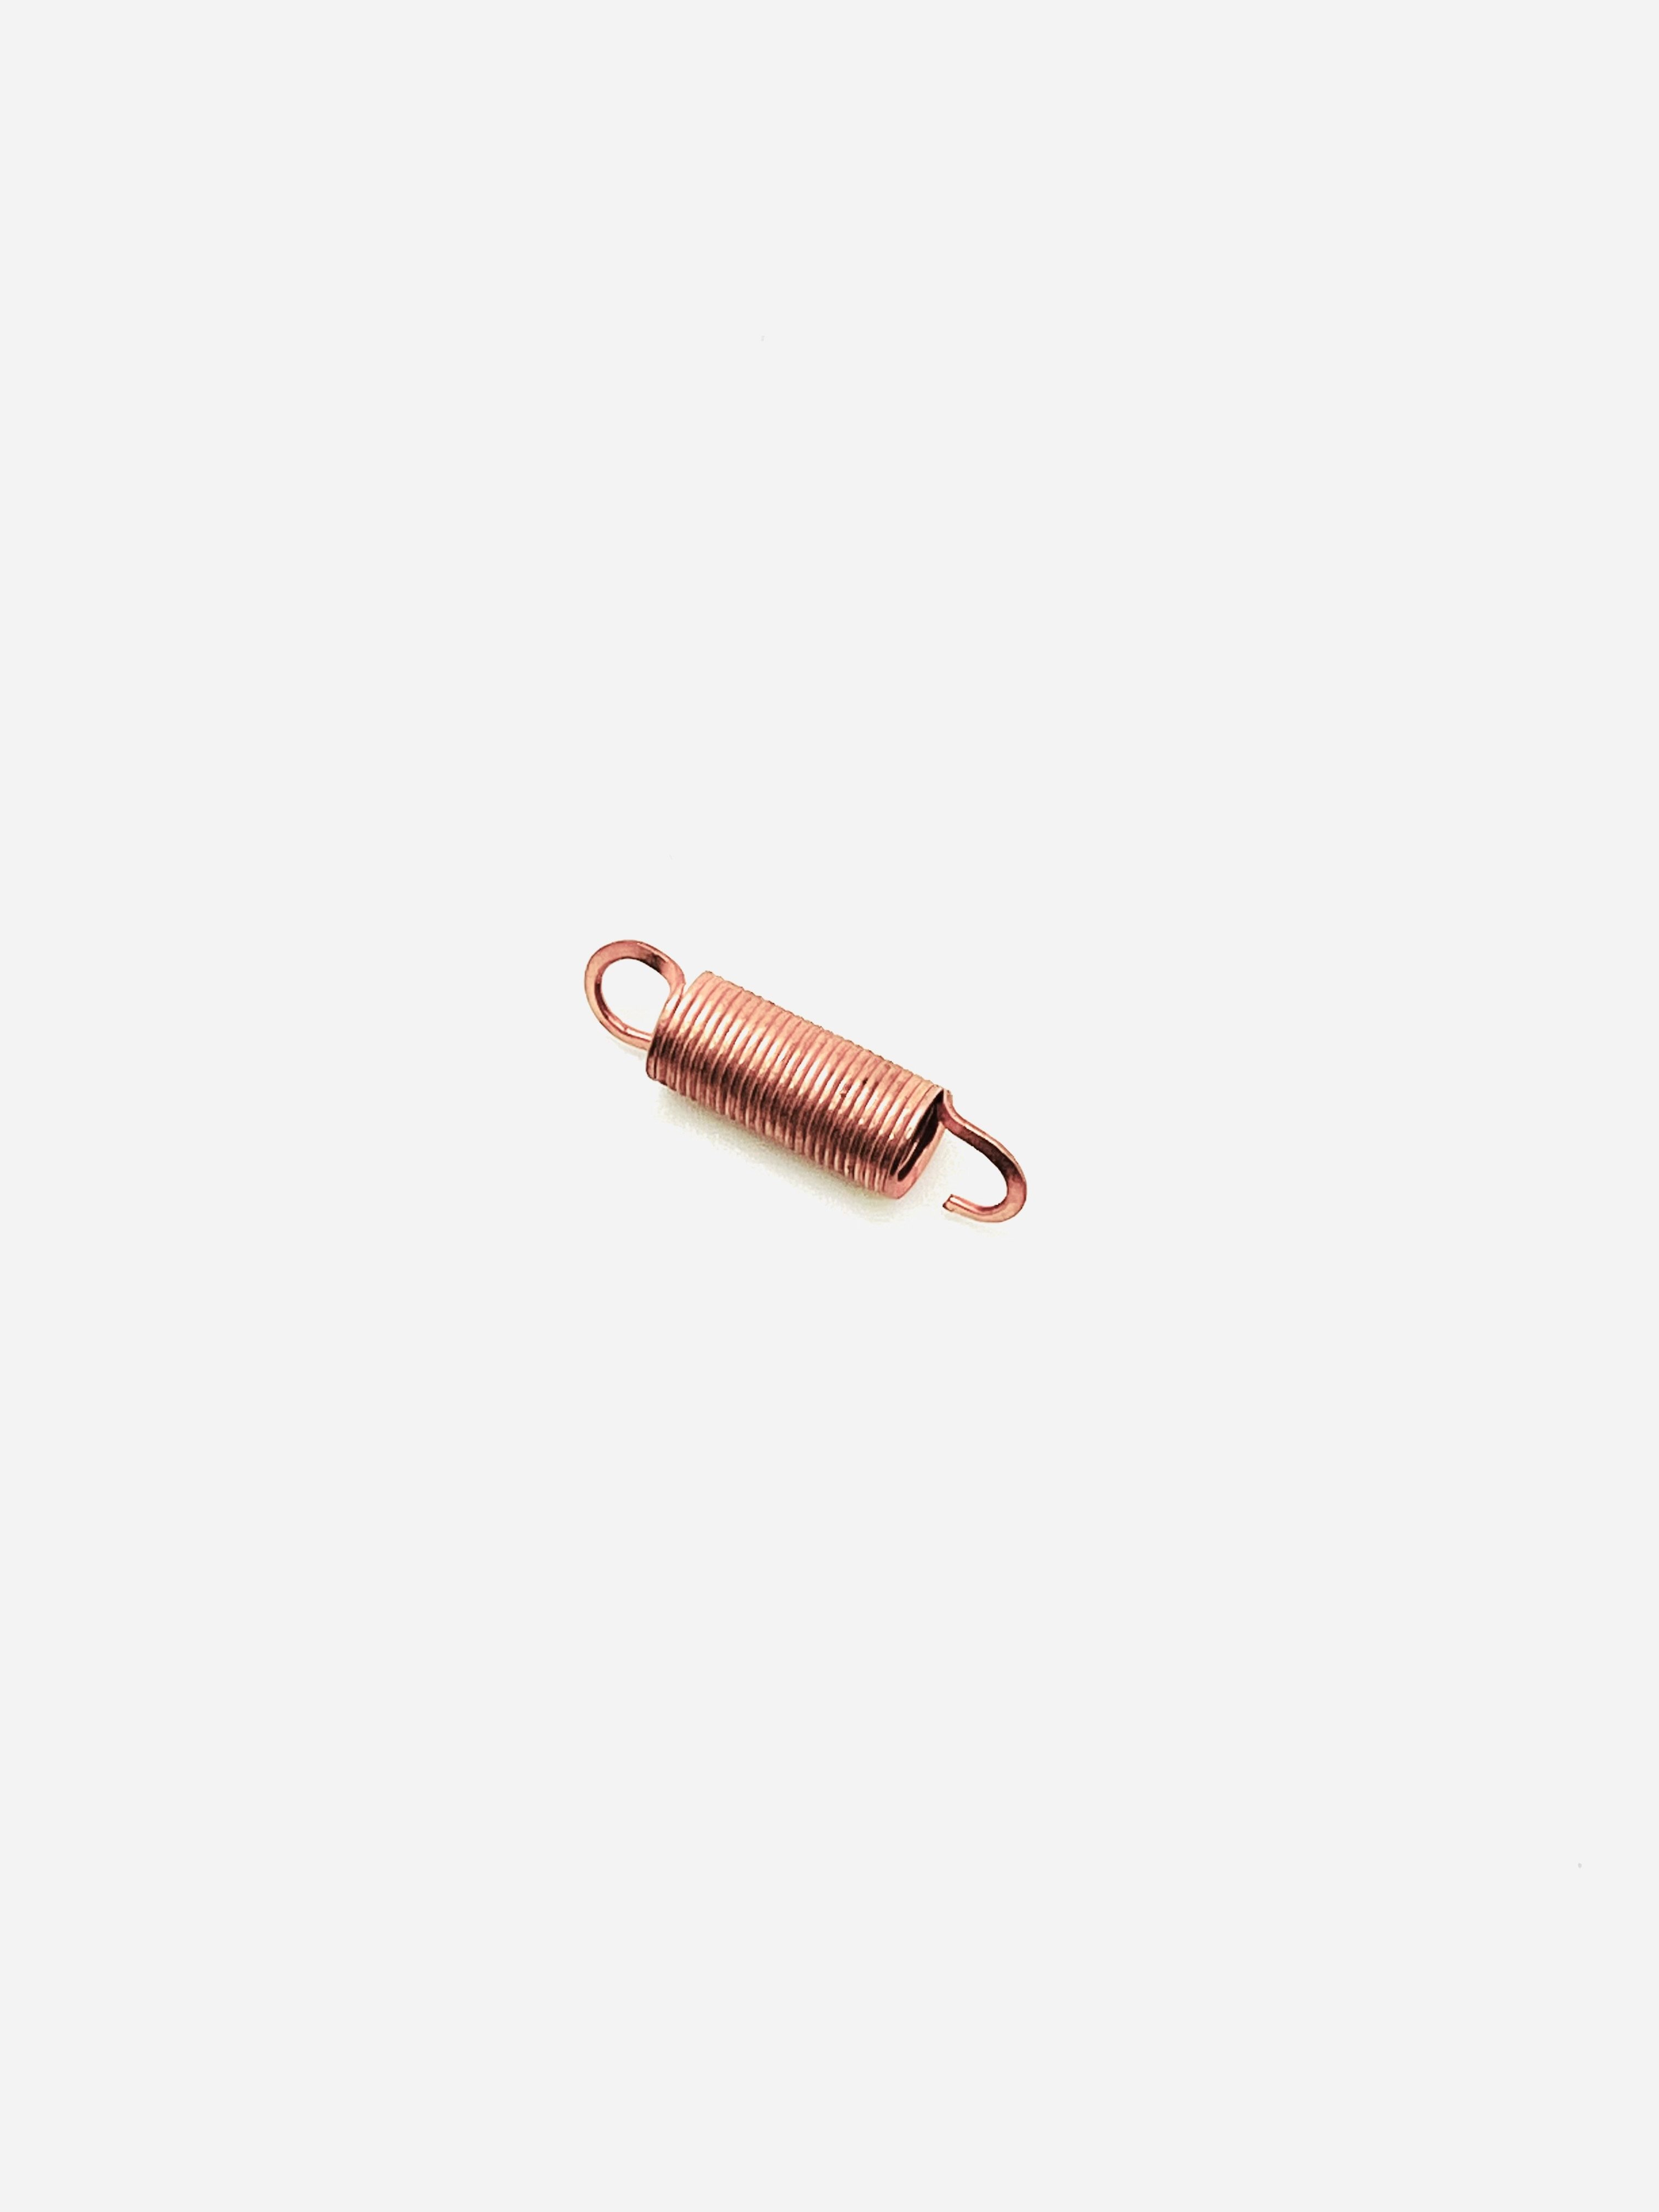 Walther Q5 trigger spring, light